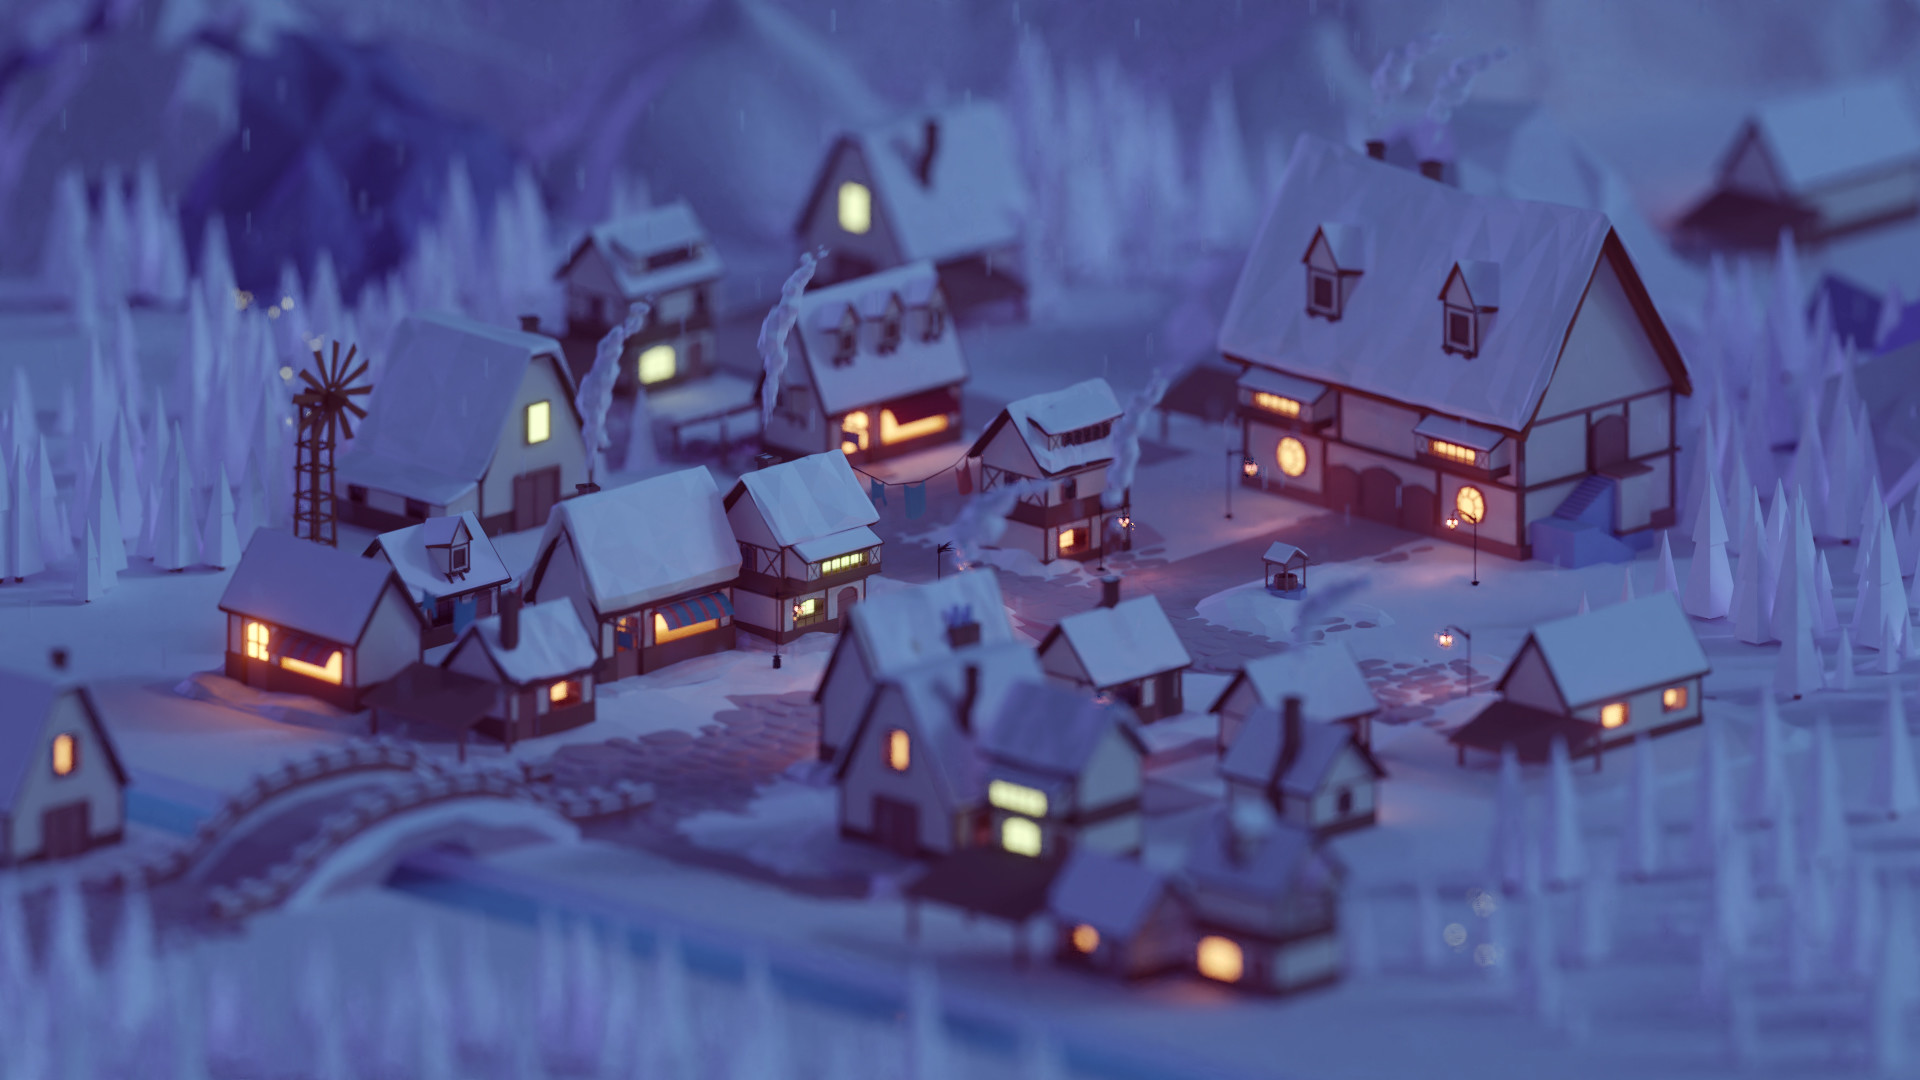 Mohamed Chahin Render Geometry Nature Forest Trees Street City Night Winter House Macro Low Poly 1920x1080